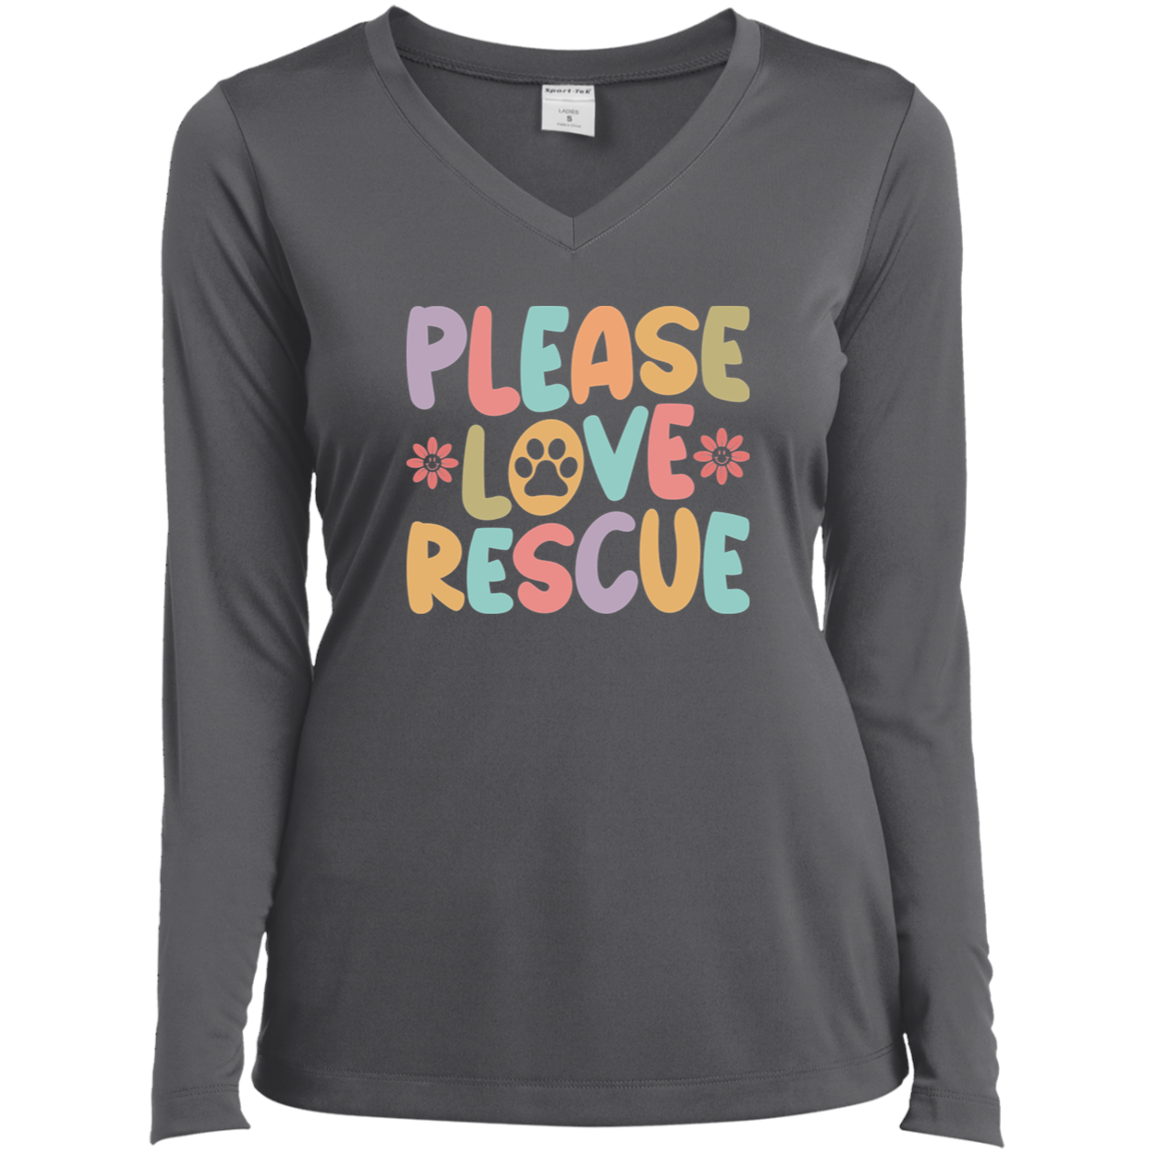 Please Love Rescue Dog Paw Print Ladies’ Long Sleeve Performance V-Neck Tee